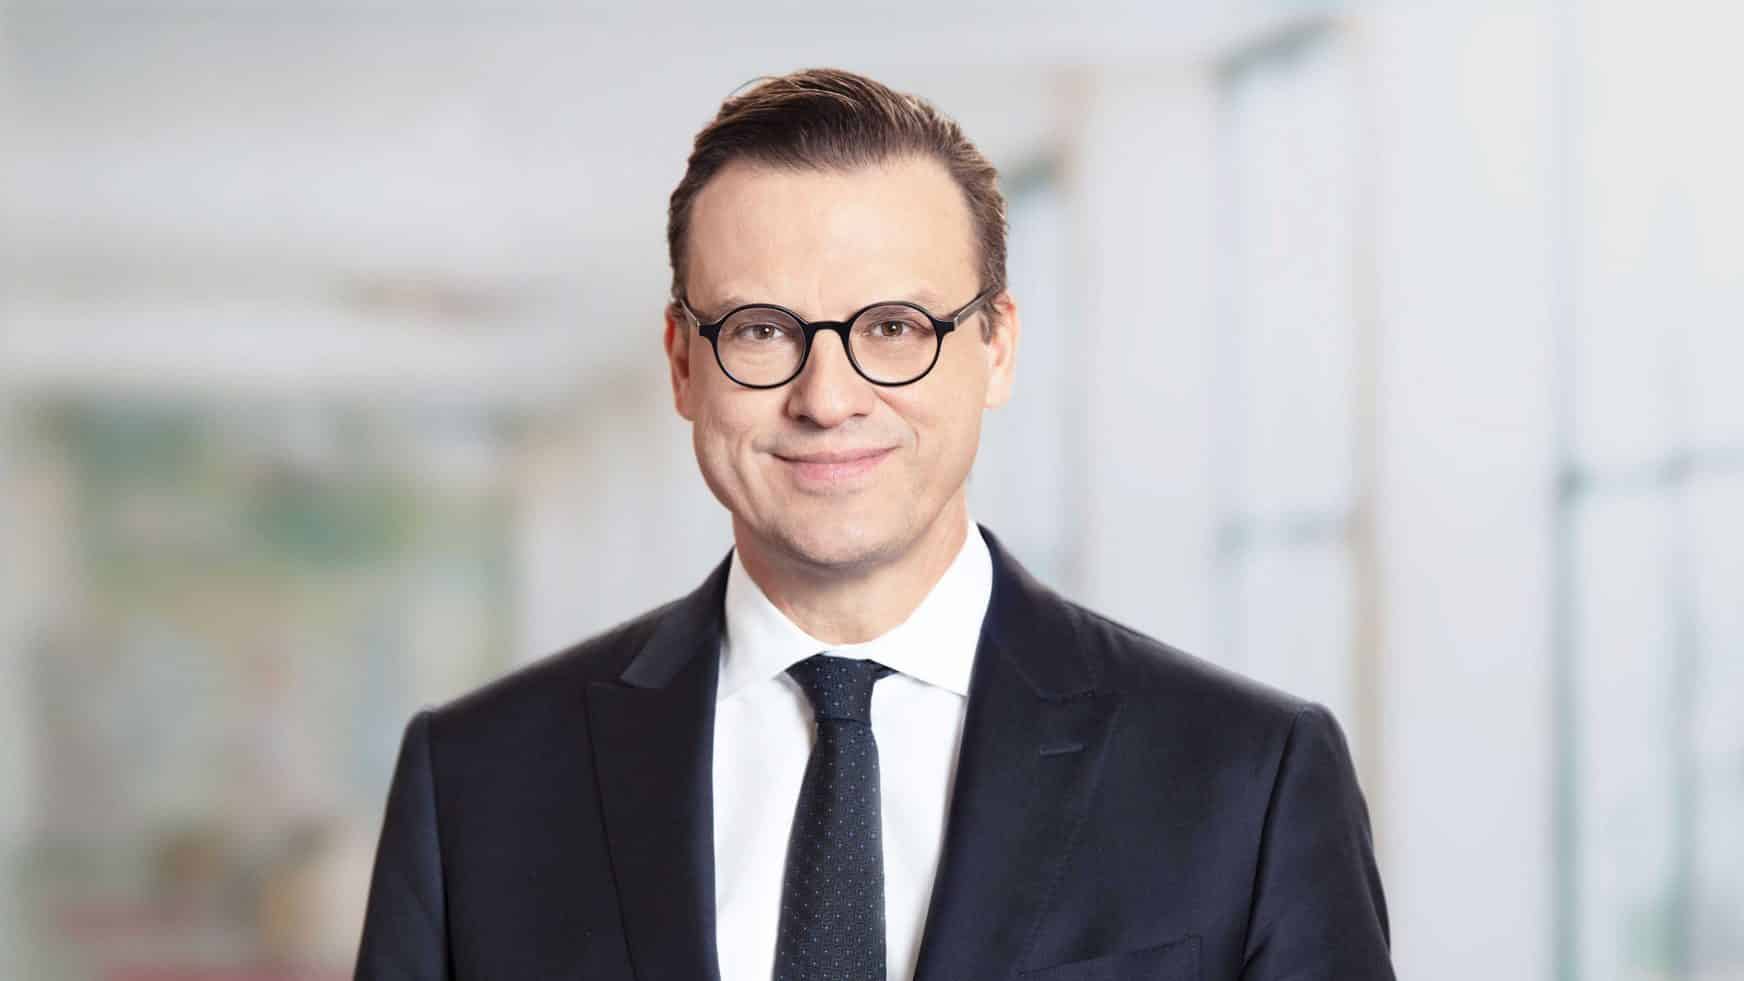 Swiss Life Chief Executive Officer (Group CEO) Patrick Frost.